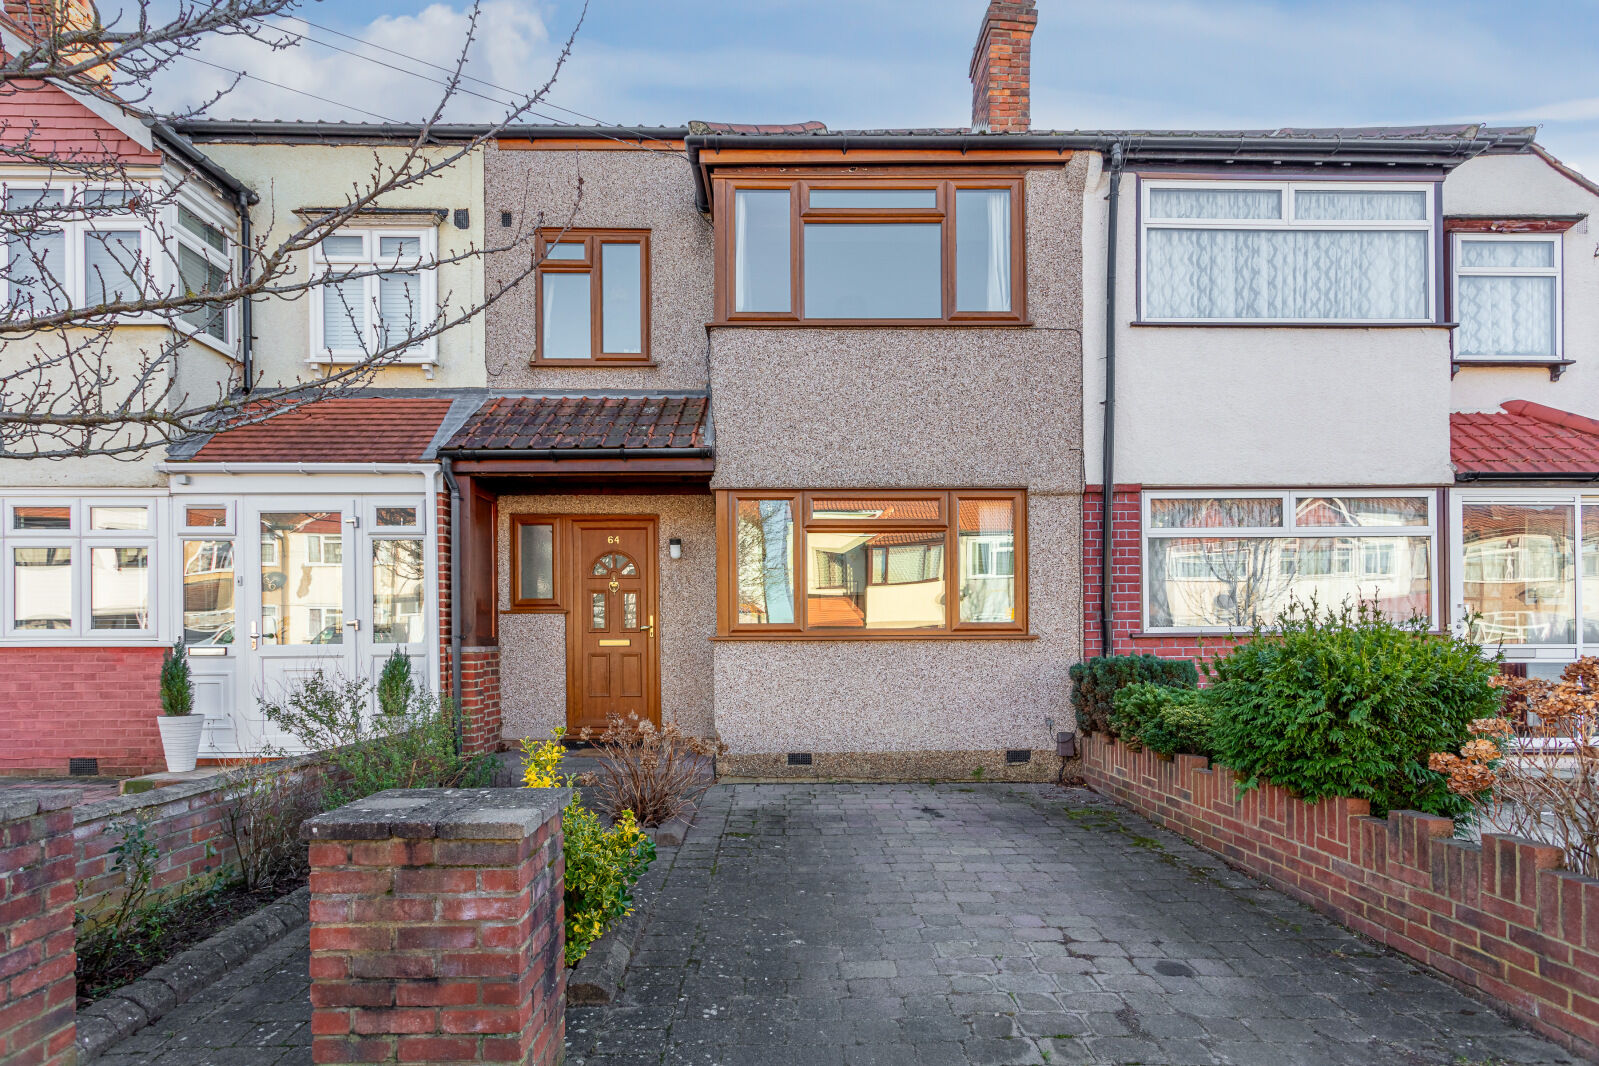 3 bedroom mid terraced house for sale New Barns Avenue, Mitcham, CR4, main image